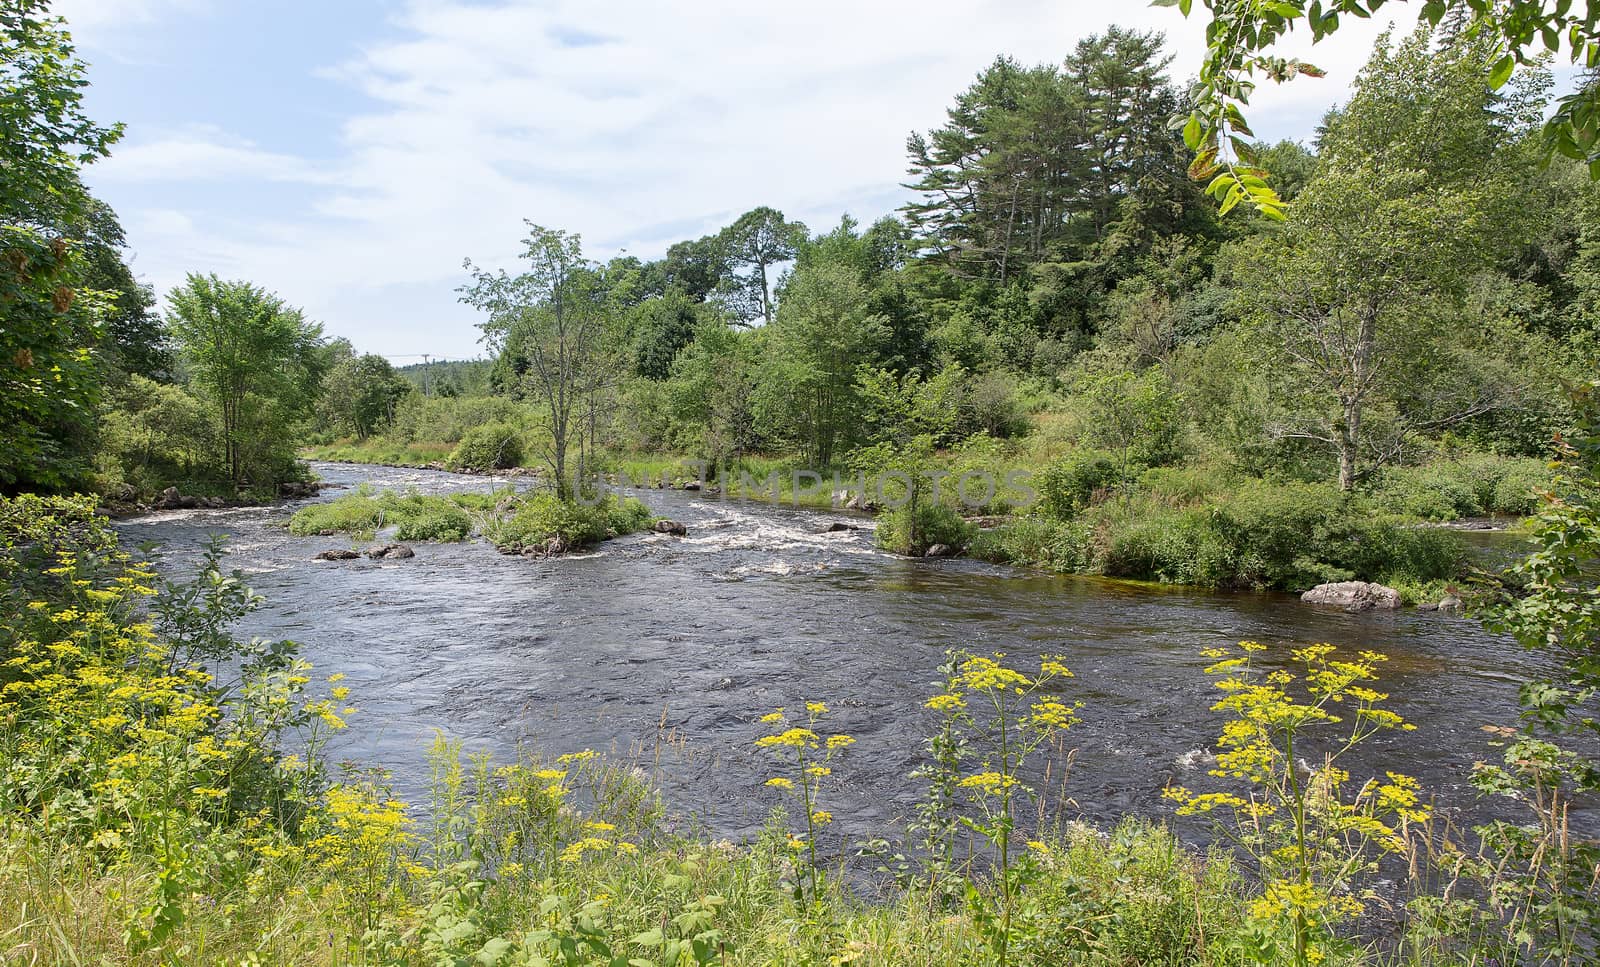 Maine is referred to as Vacationland. This image of a beautiful river feeding out to the Atlantic supports that slogan.